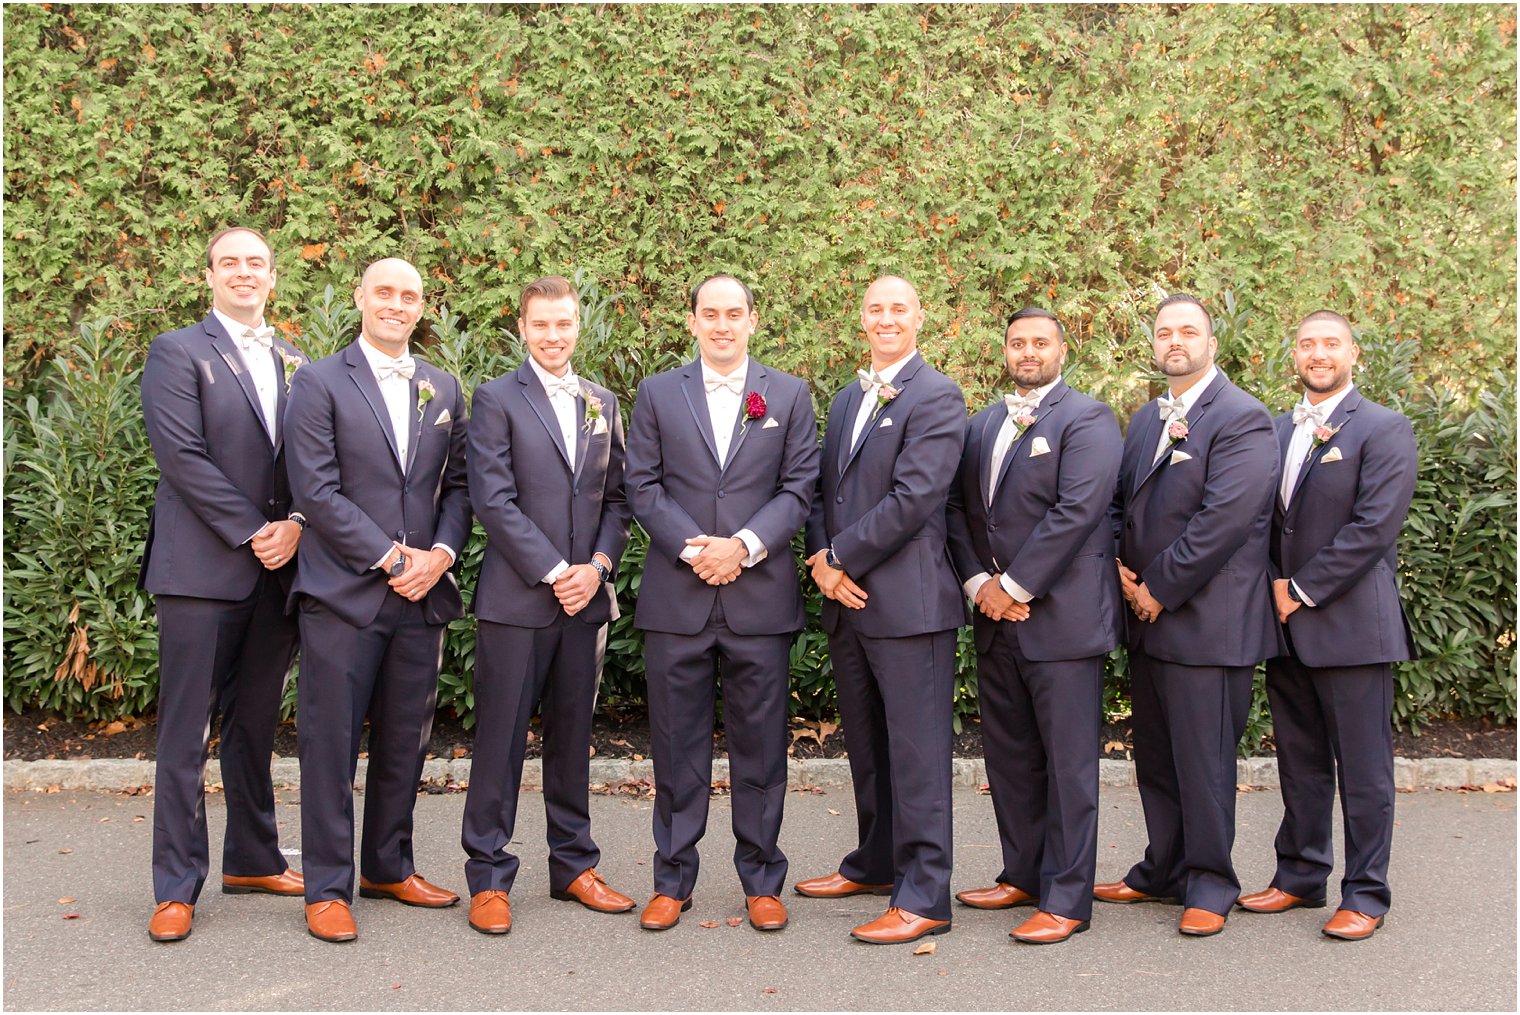 Groomsmen in navy suits and brown shoes